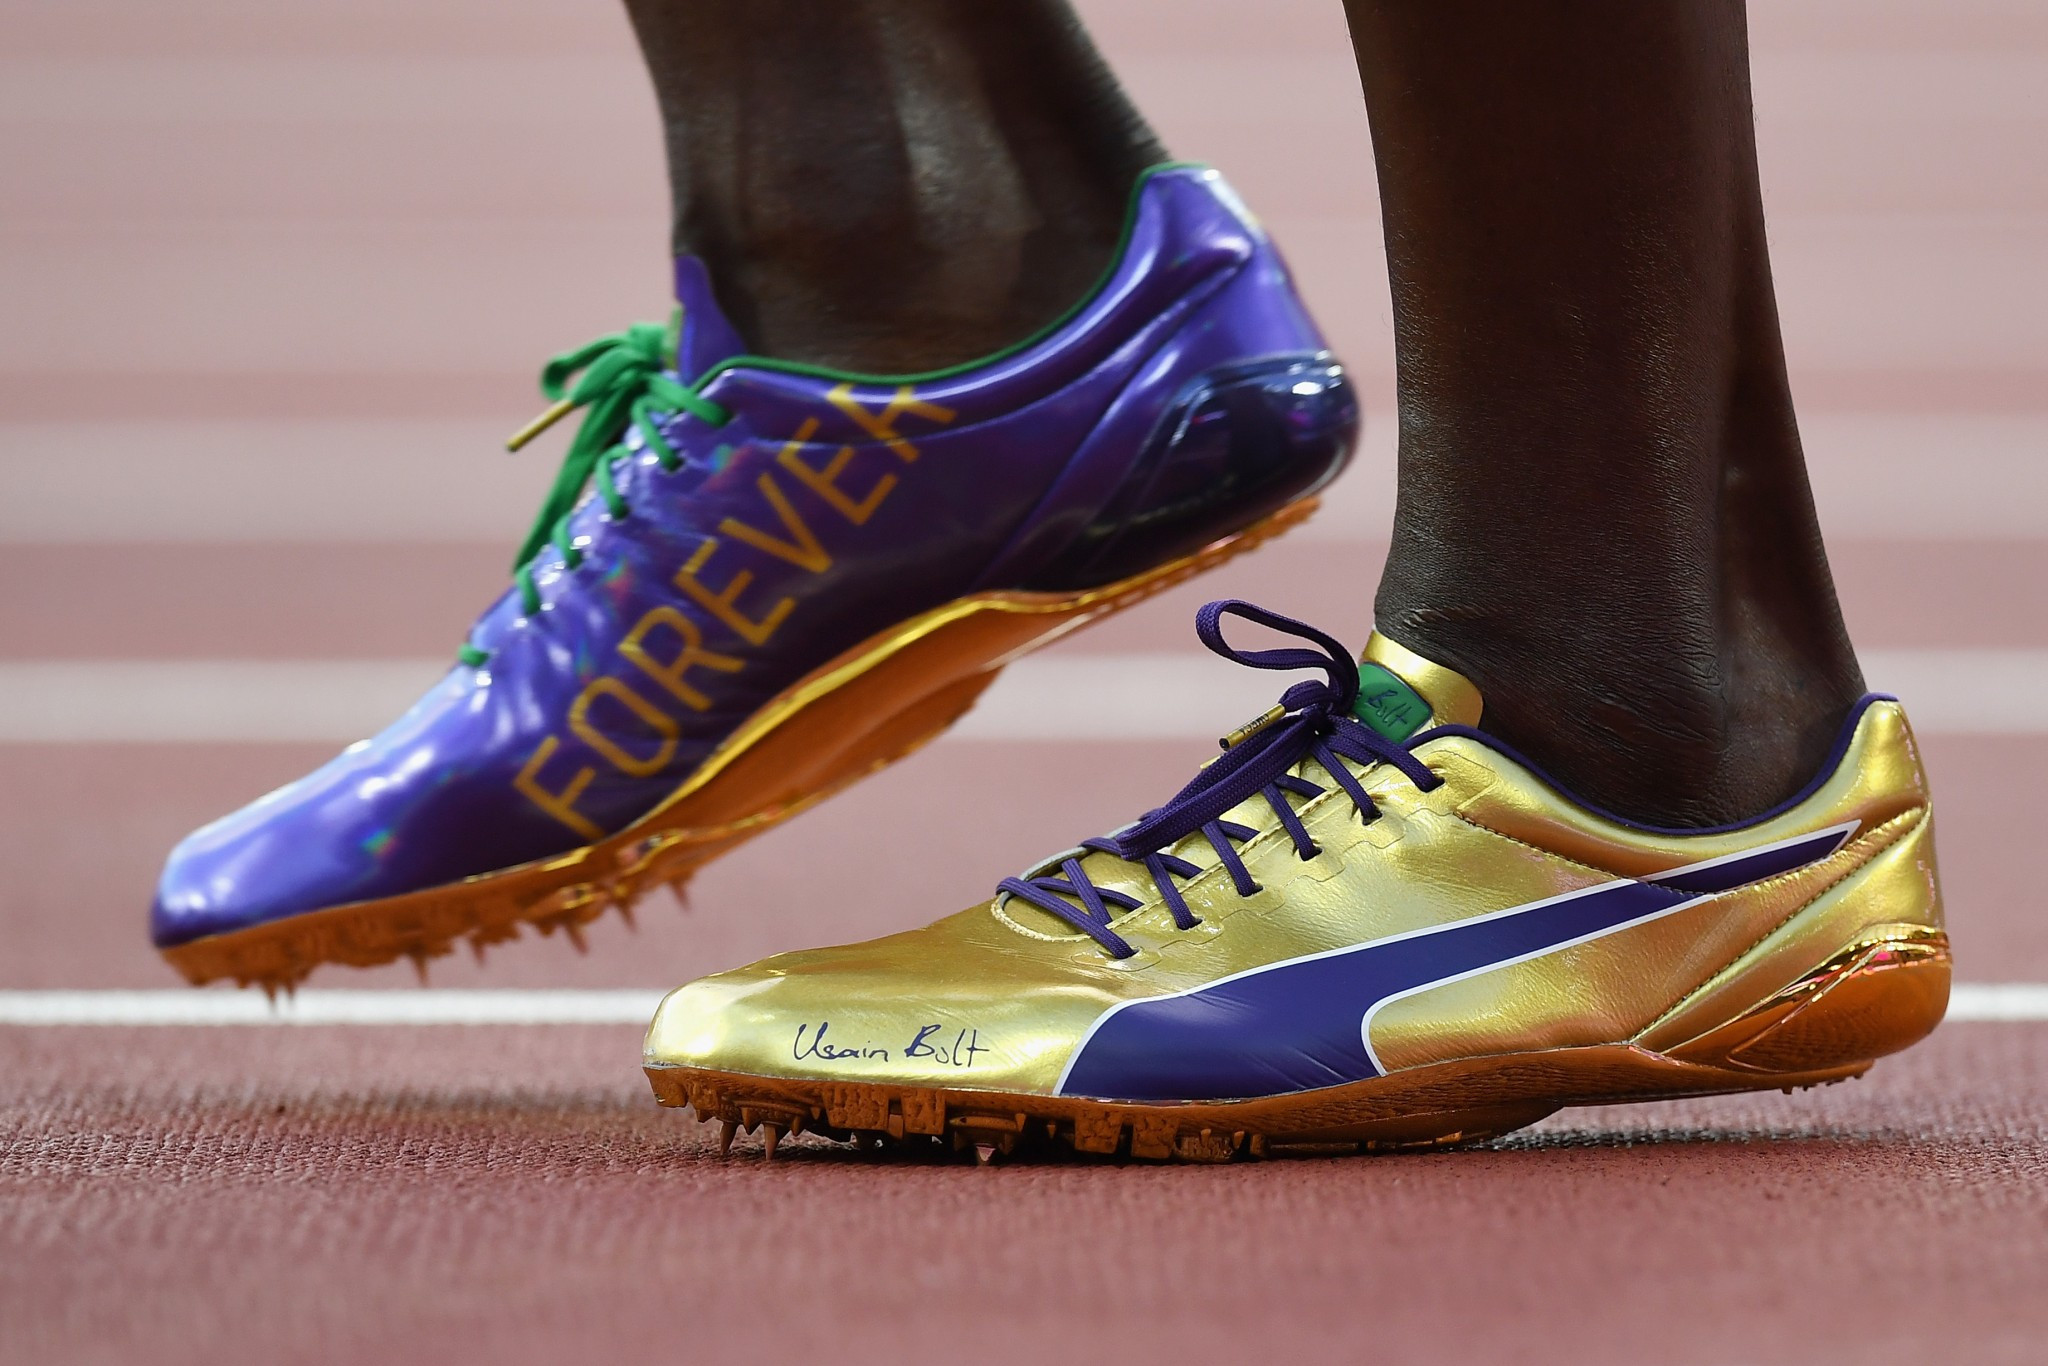 Usain Bolt sported special shoes before his 100m semi-final ©Getty Images